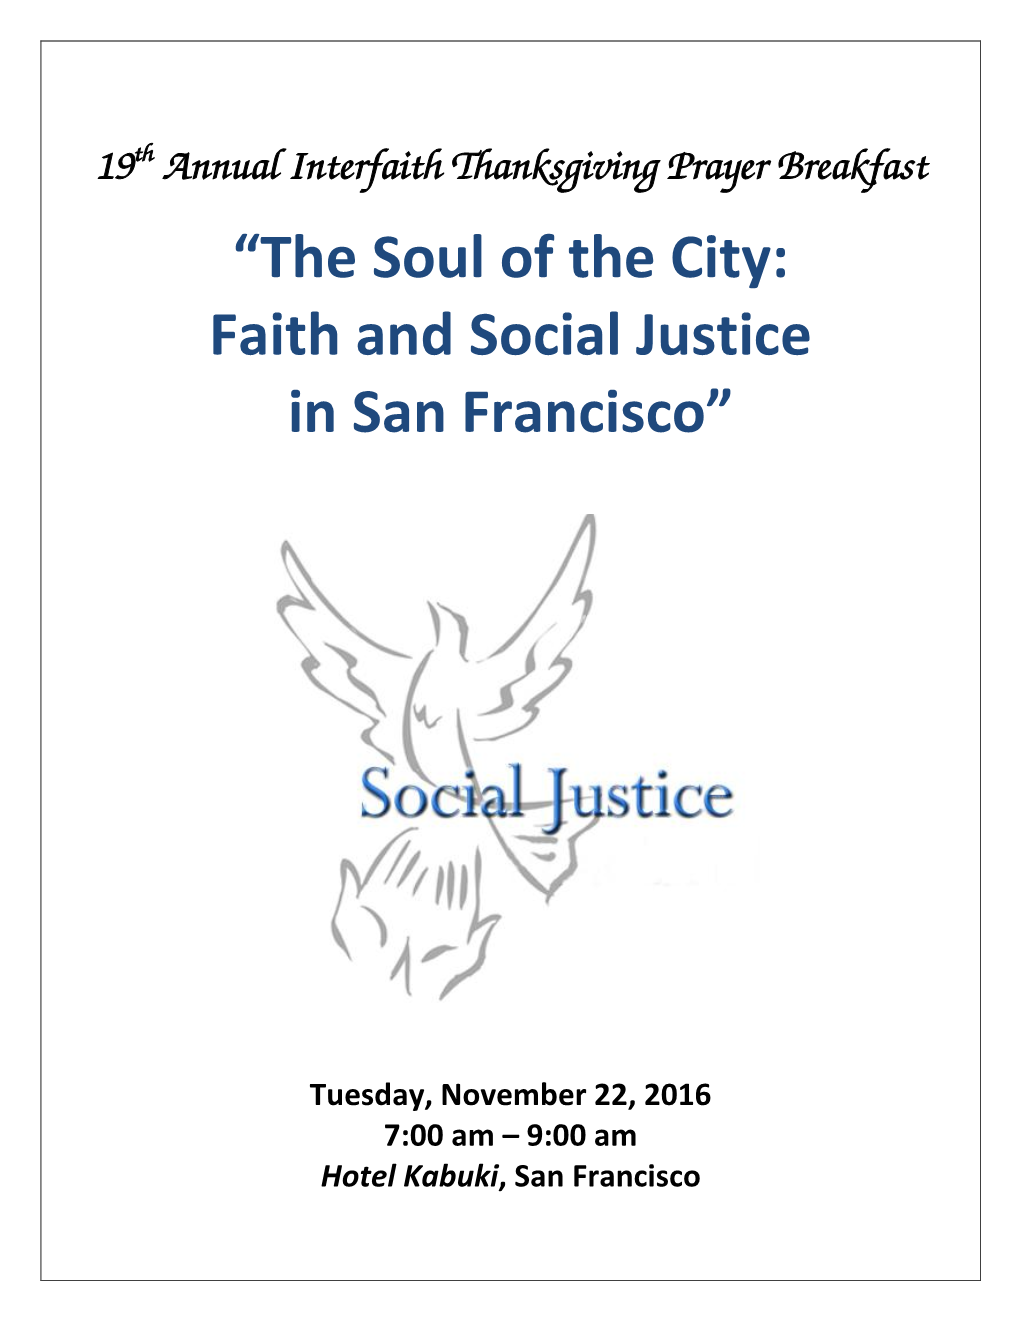 “The Soul of the City: Faith and Social Justice in San Francisco”